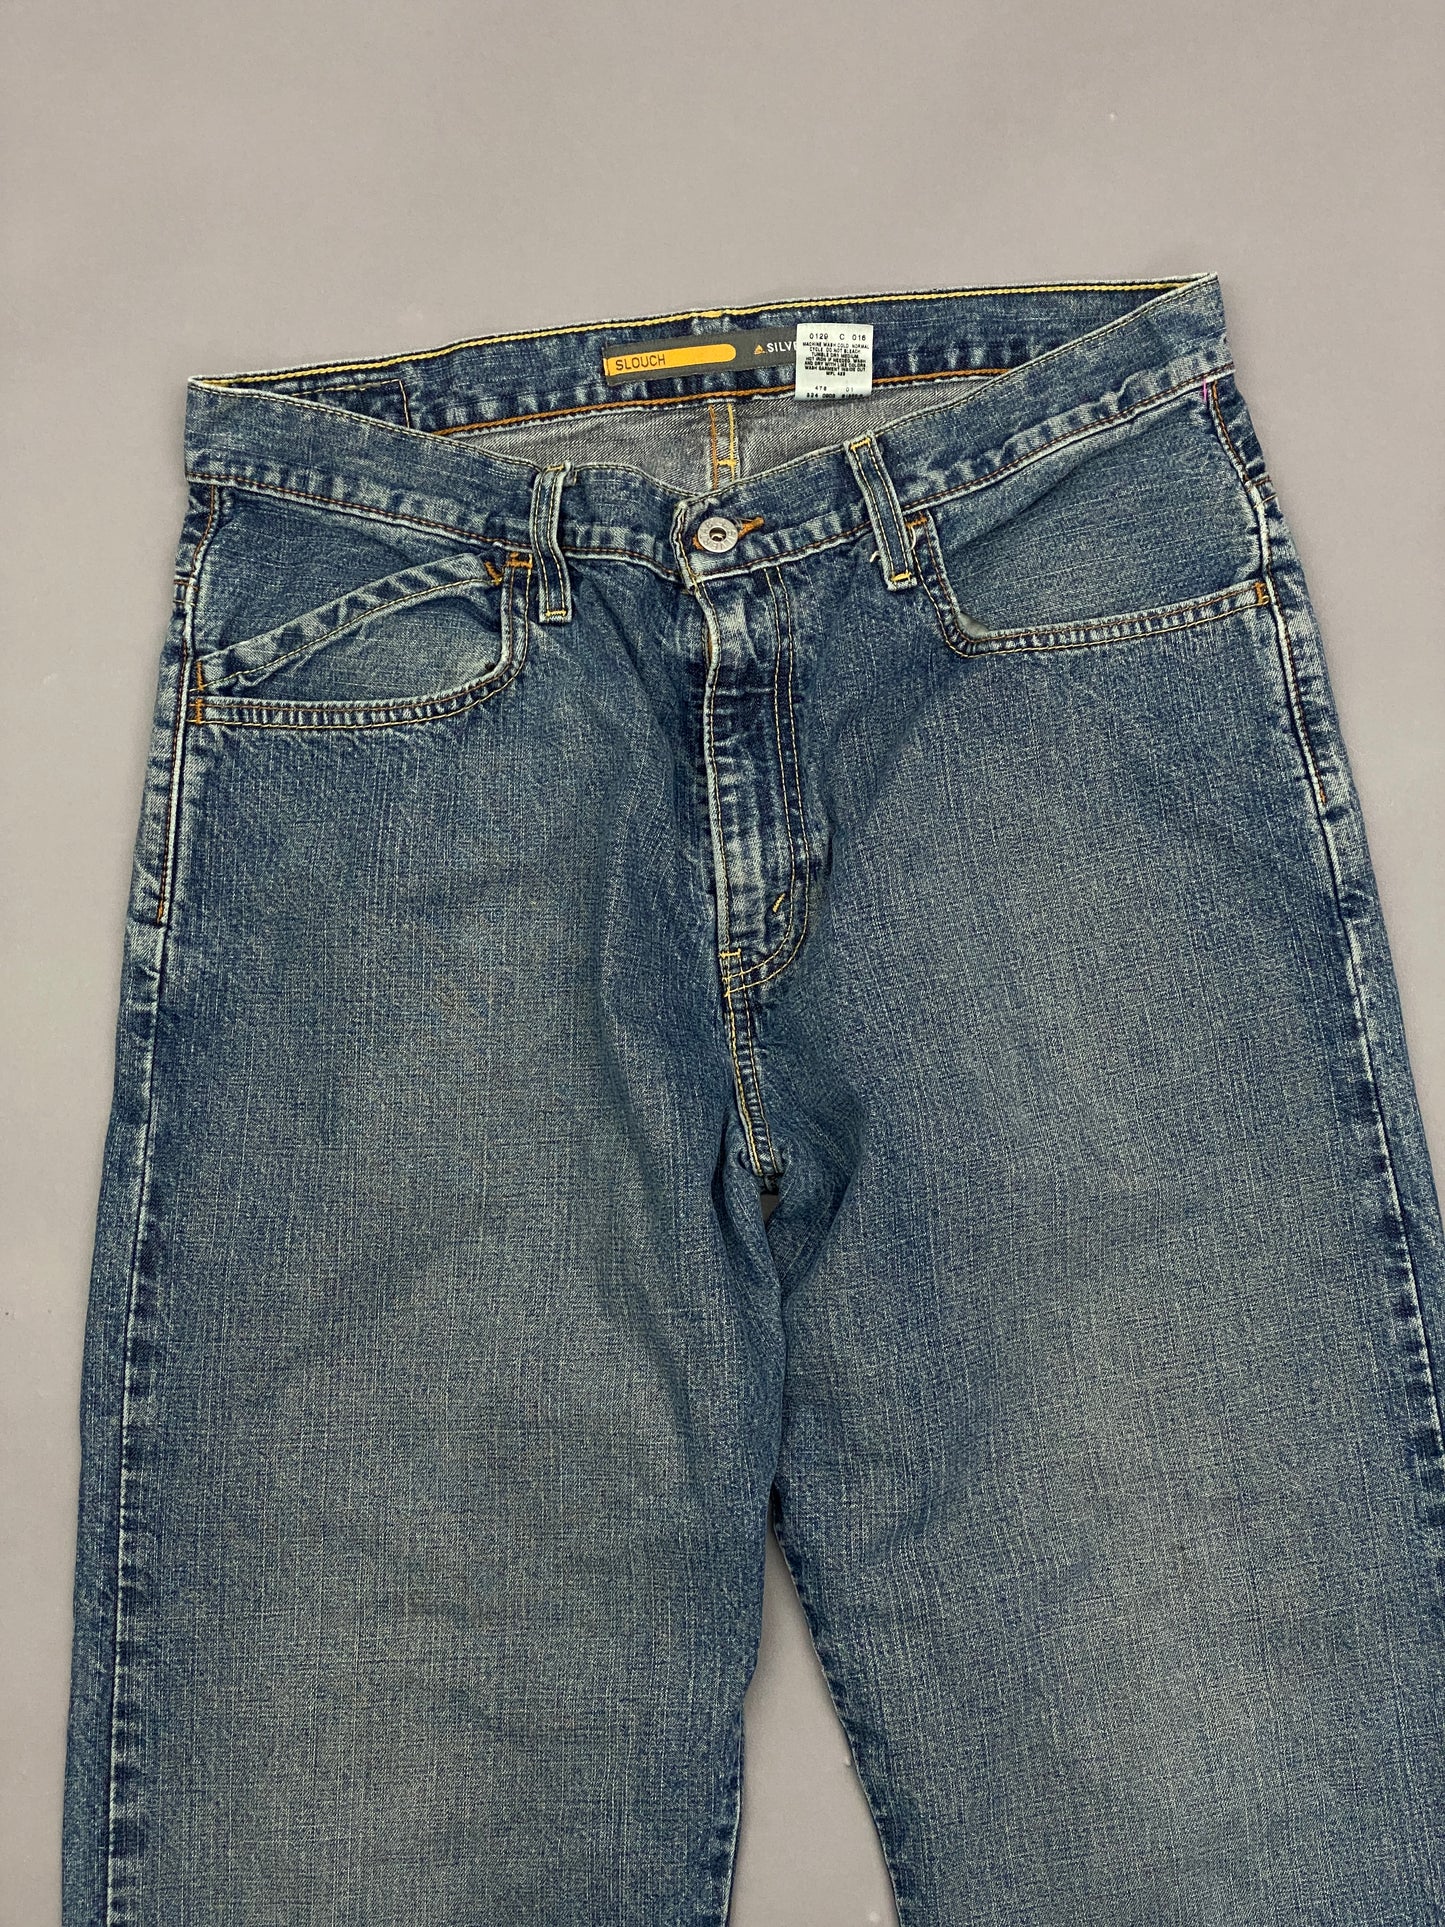 Levis Silvertab Slouch Vintage Jeans - 33x32